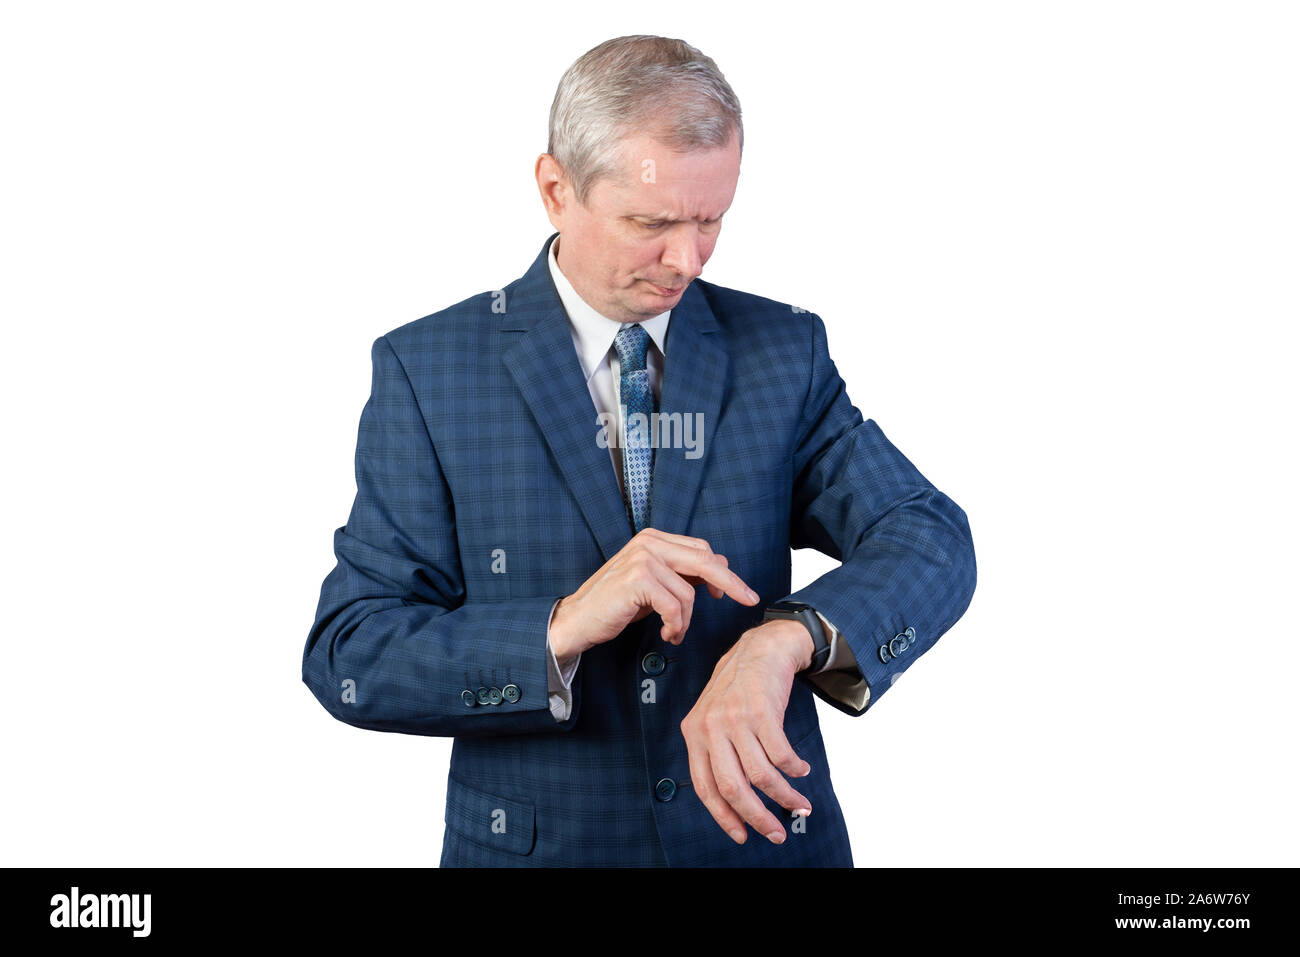 An elderly man in a suit measures the pulse of a fitness bracelet. Isolated on a white background. Stock Photo